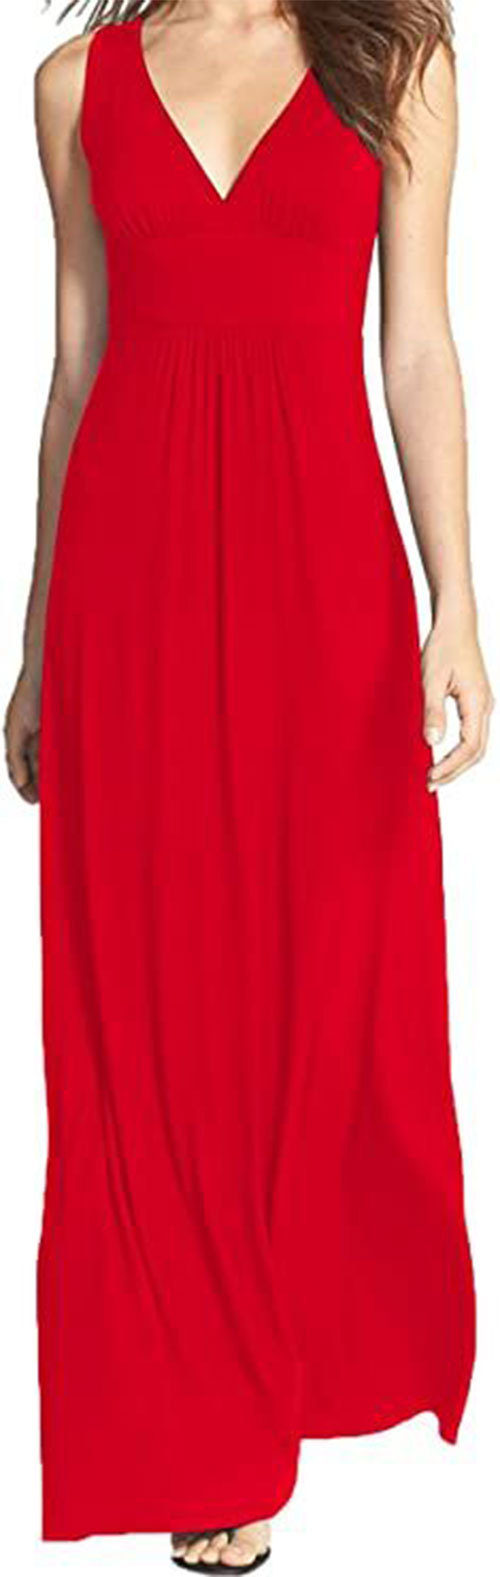 Valentine’s Day-Dresses-Red-Fashion-Outfits-2021-11